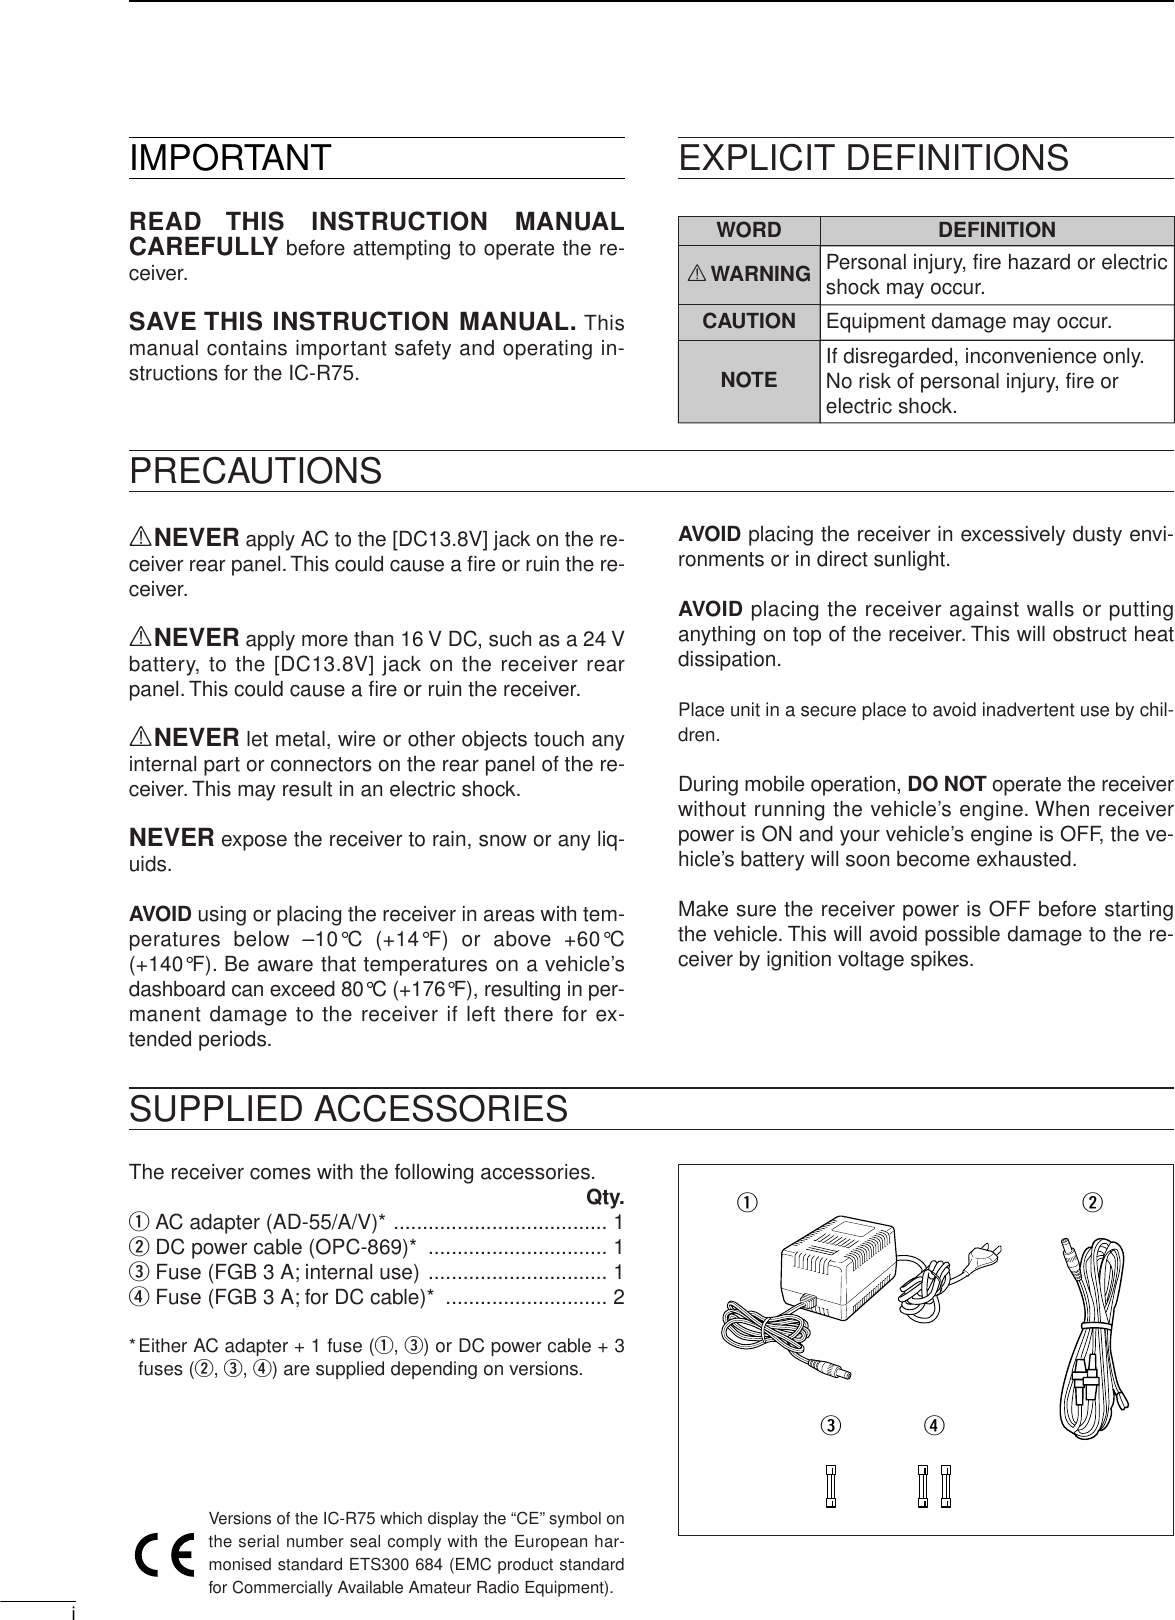 iIMPORTANTREAD THIS INSTRUCTION MANUALCAREFULLY before attempting to operate the re-ceiver.SAVE THIS INSTRUCTION MANUAL. Thismanual contains important safety and operating in-structions for the IC-R75.EXPLICIT DEFINITIONSRNEVER apply AC to the [DC13.8V] jack on the re-ceiver rear panel.This could cause a ﬁre or ruin the re-ceiver.RNEVER apply more than 16 V DC, such as a 24 Vbattery, to the [DC13.8V] jack on the receiver rearpanel. This could cause a ﬁre or ruin the receiver.RNEVER let metal, wire or other objects touch anyinternal part or connectors on the rear panel of the re-ceiver. This may result in an electric shock.NEVER expose the receiver to rain, snow or any liq-uids.AVOID using or placing the receiver in areas with tem-peratures below –10°C (+14°F) or above +60°C(+140°F). Be aware that temperatures on a vehicle’sdashboard can exceed 80°C (+176°F), resulting in per-manent damage to the receiver if left there for ex-tended periods.AVOID placing the receiver in excessively dusty envi-ronments or in direct sunlight.AVOID placing the receiver against walls or puttinganything on top of the receiver. This will obstruct heatdissipation.Place unit in a secure place to avoid inadvertent use by chil-dren.During mobile operation, DO NOT operate the receiverwithout running the vehicle’s engine. When receiverpower is ON and your vehicle’s engine is OFF, the ve-hicle’s battery will soon become exhausted.Make sure the receiver power is OFF before startingthe vehicle. This will avoid possible damage to the re-ceiver by ignition voltage spikes.The receiver comes with the following accessories.Qty.qAC adapter (AD-55/A/V)* ..................................... 1wDC power cable (OPC-869)*  ............................... 1eFuse (FGB 3 A; internal use) ............................... 1rFuse (FGB 3 A; for DC cable)*  ............................ 2*Either AC adapter + 1 fuse (q, e) or DC power cable + 3fuses (w, e, r) are supplied depending on versions.PRECAUTIONSSUPPLIED ACCESSORIESVersions of the IC-R75 which display the “CE” symbol onthe serial number seal comply with the European har-monised standard ETS300 684 (EMC product standardfor Commercially Available Amateur Radio Equipment).WORDR WARNINGCAUTIONNOTEDEFINITIONPersonal injury, fire hazard or electric shock may occur.If disregarded, inconvenience only. No risk of personal injury, fire or electric shock.Equipment damage may occur.q wer